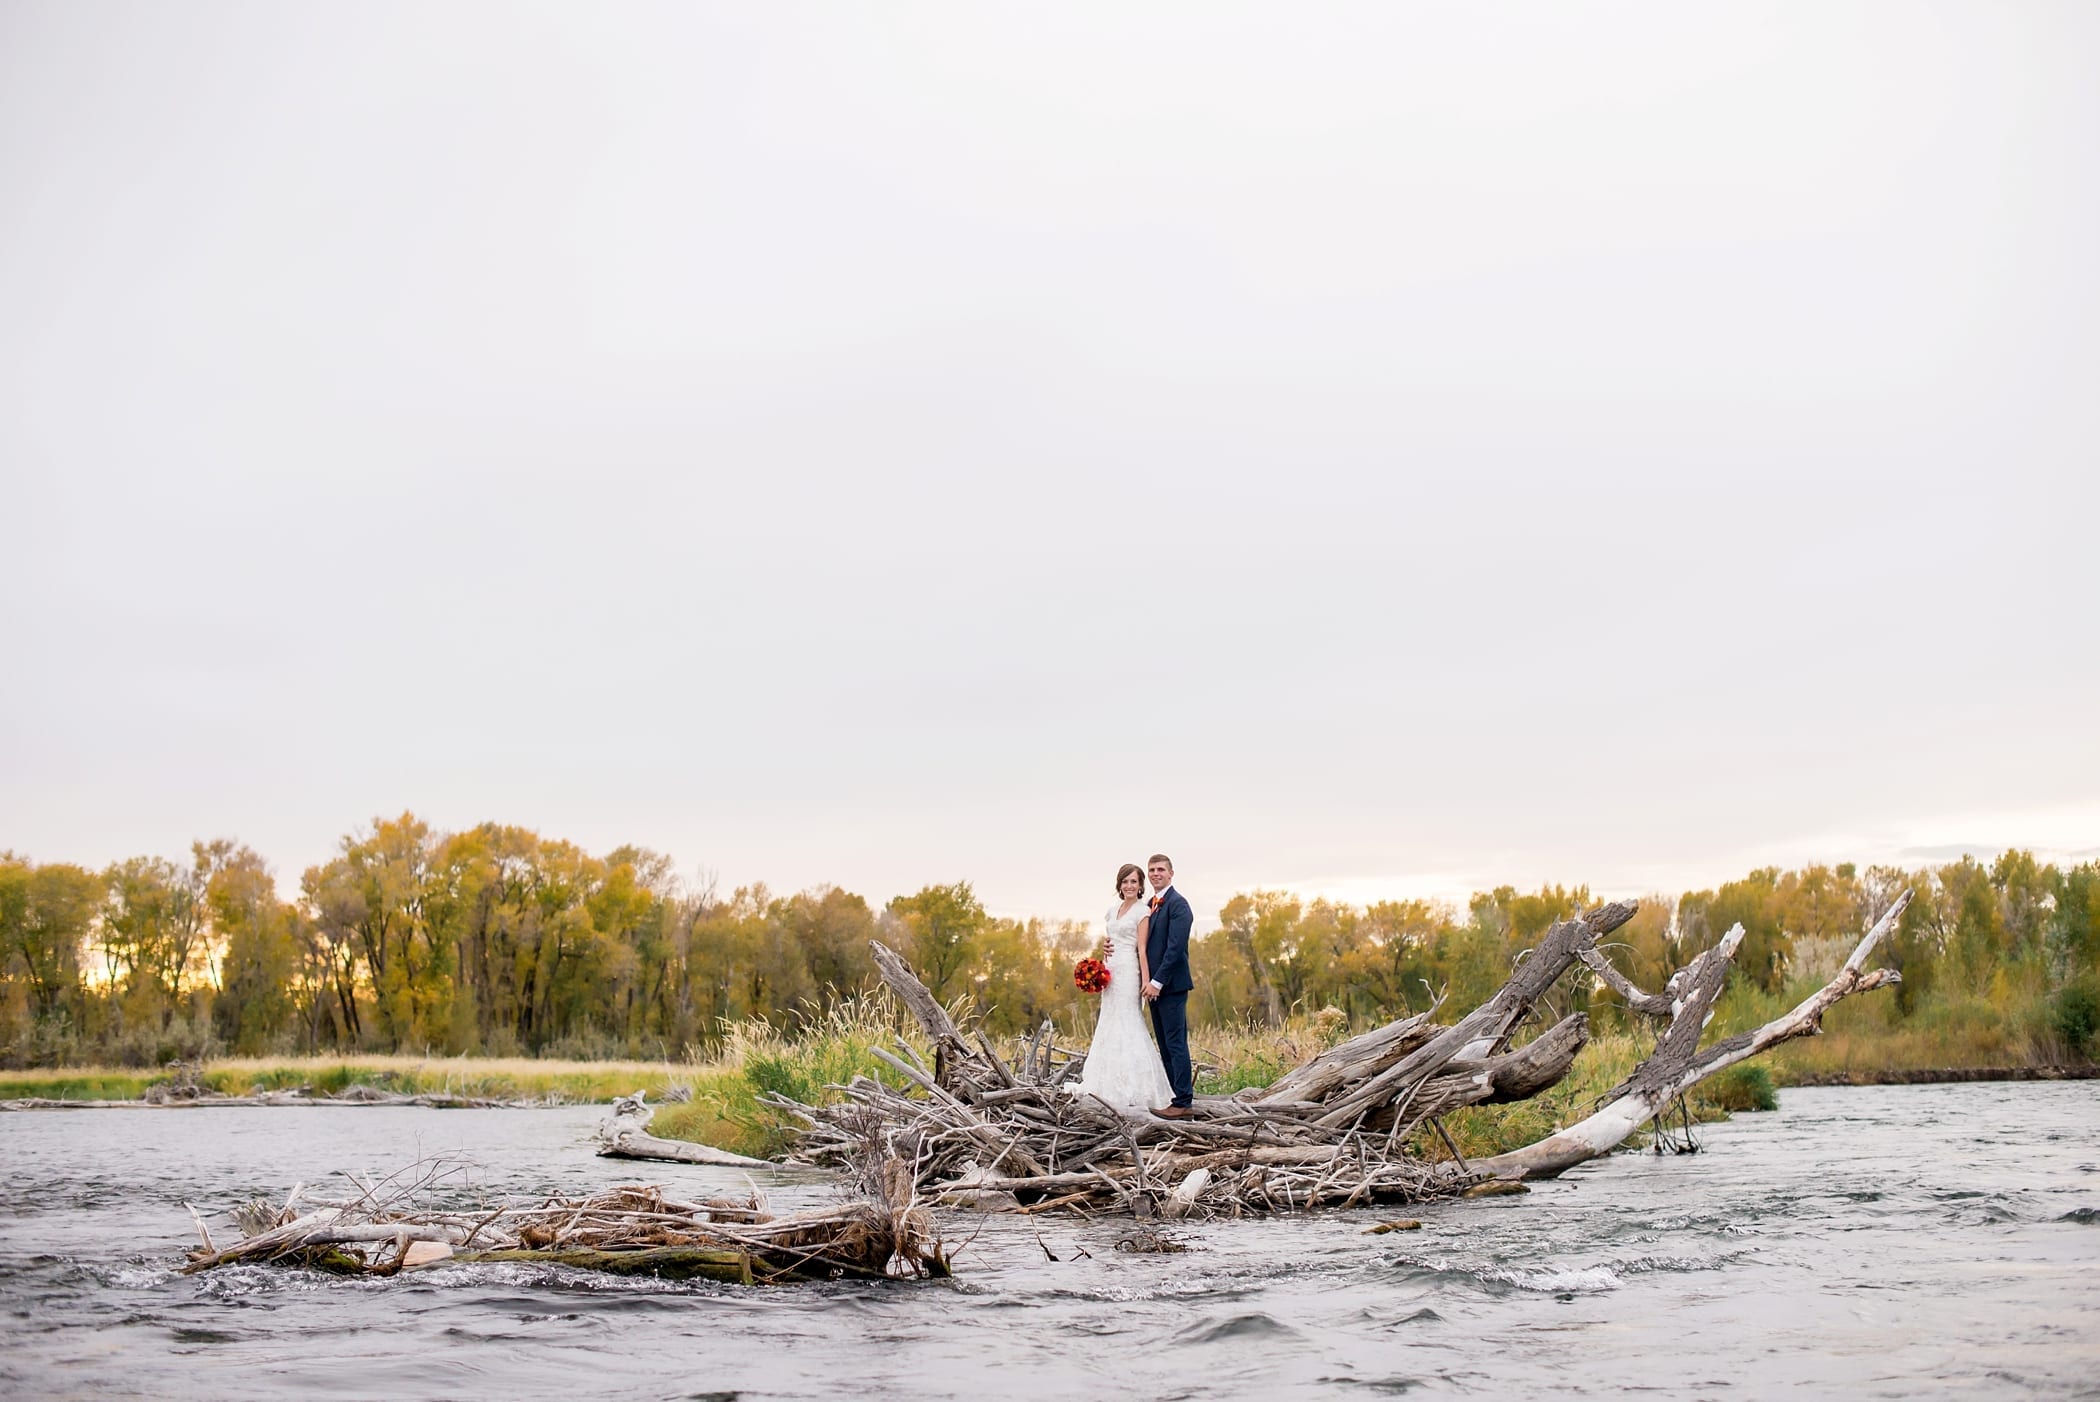  Idaho Bridals on the River by Michelle & Logan Photo+Films